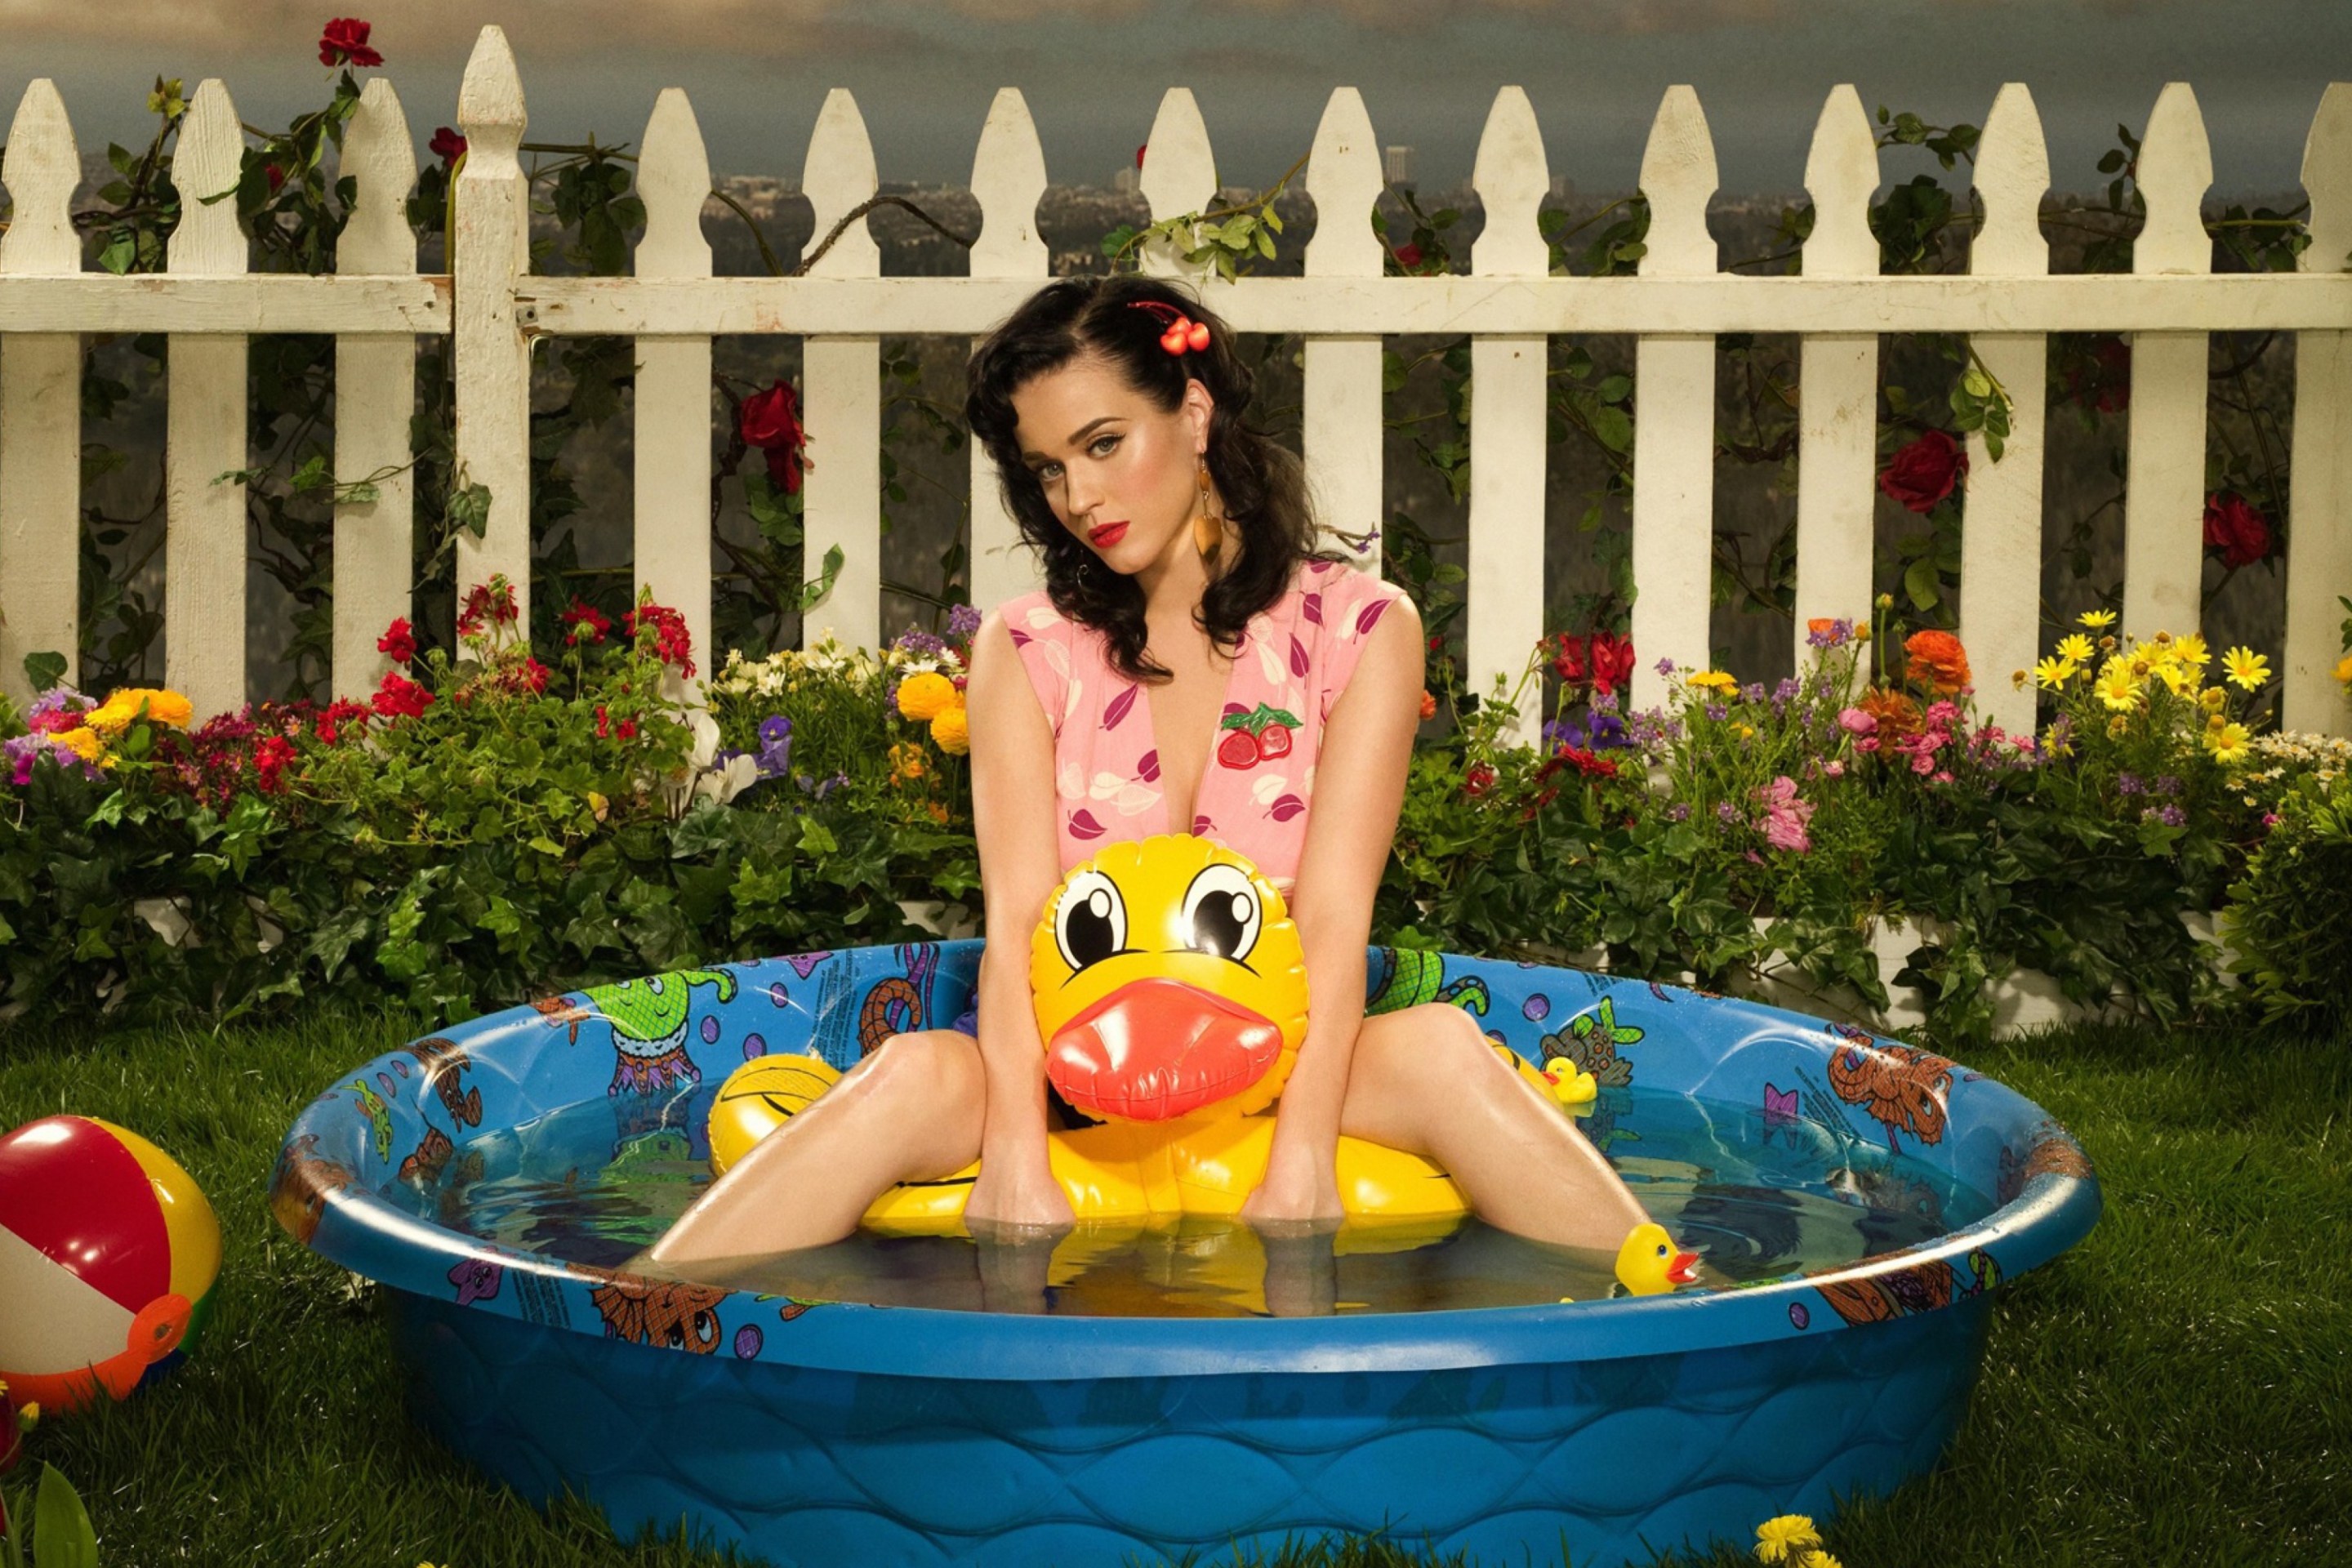 Katy Perry And Yellow Duck wallpaper 2880x1920